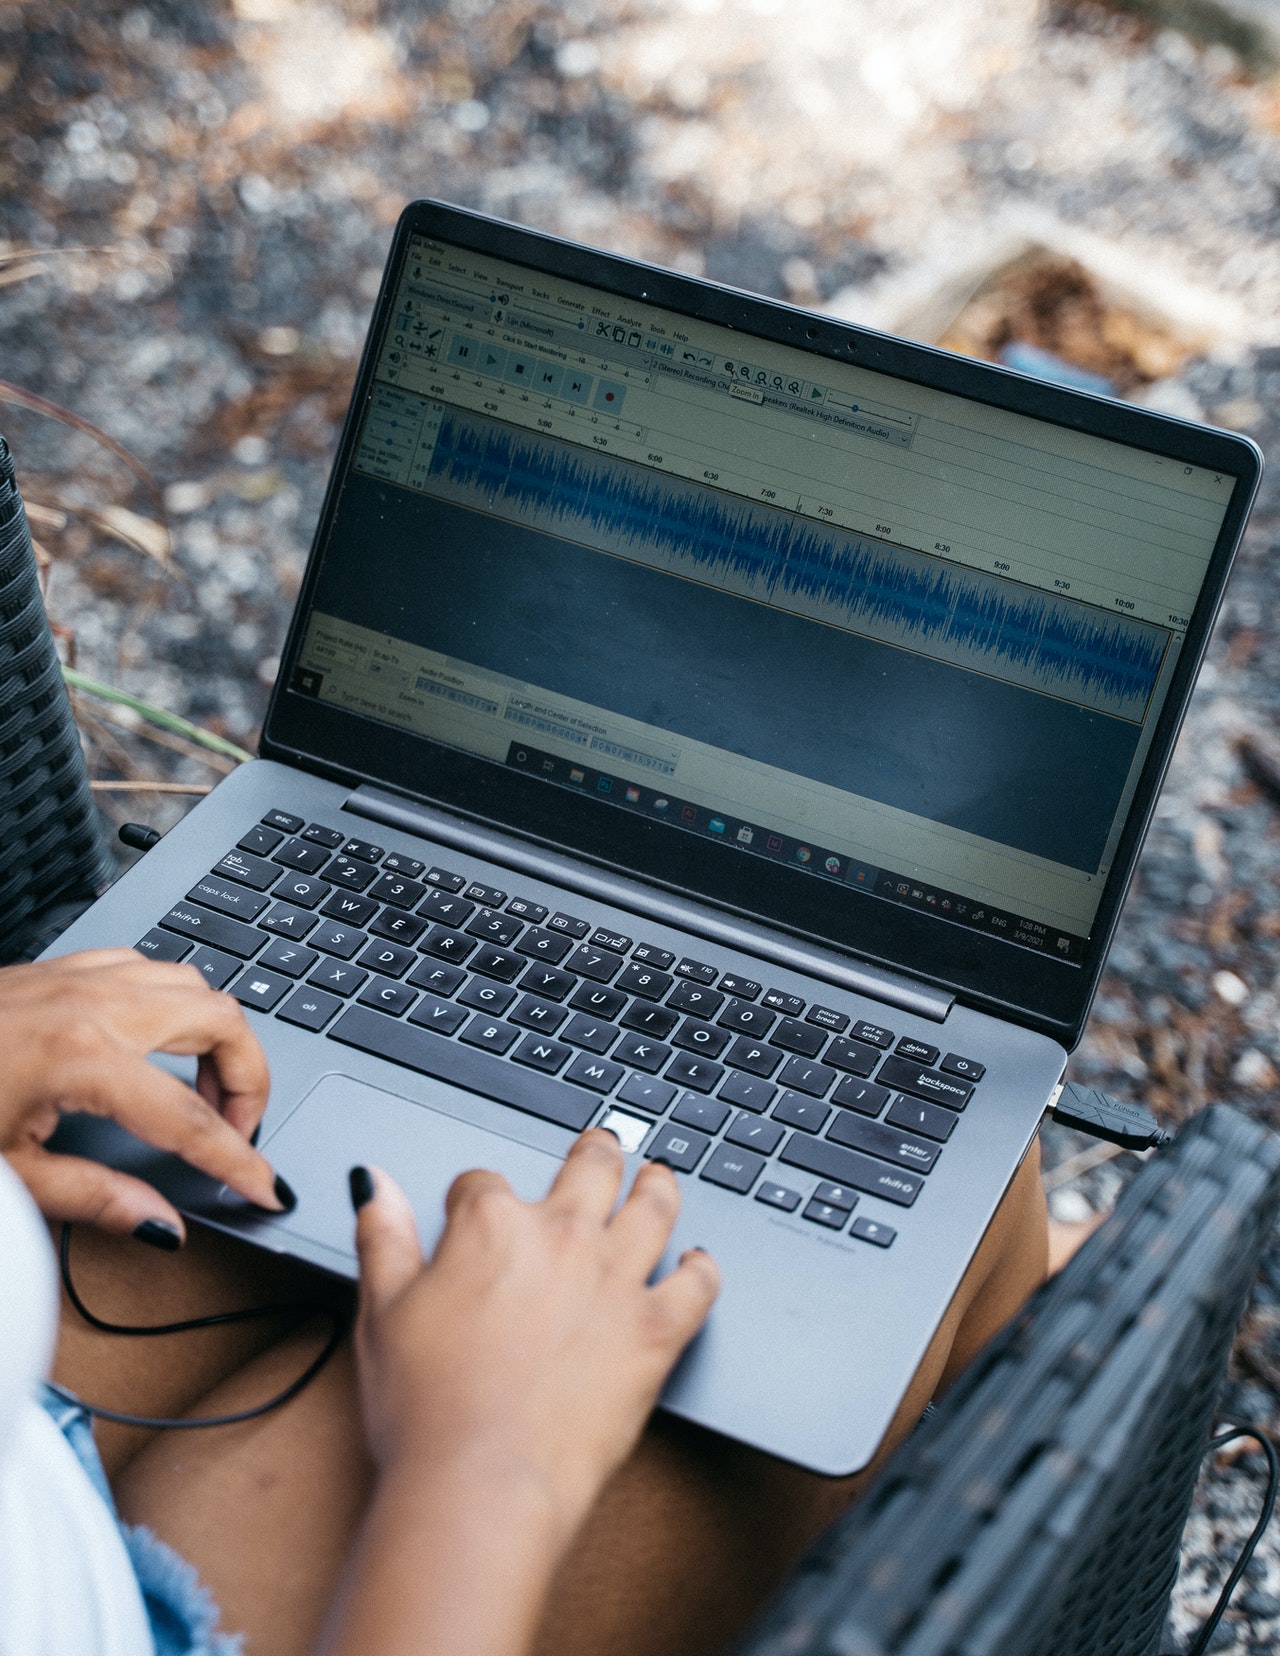 editing audio using Audacity. 3 common editing mistakes for podcasters